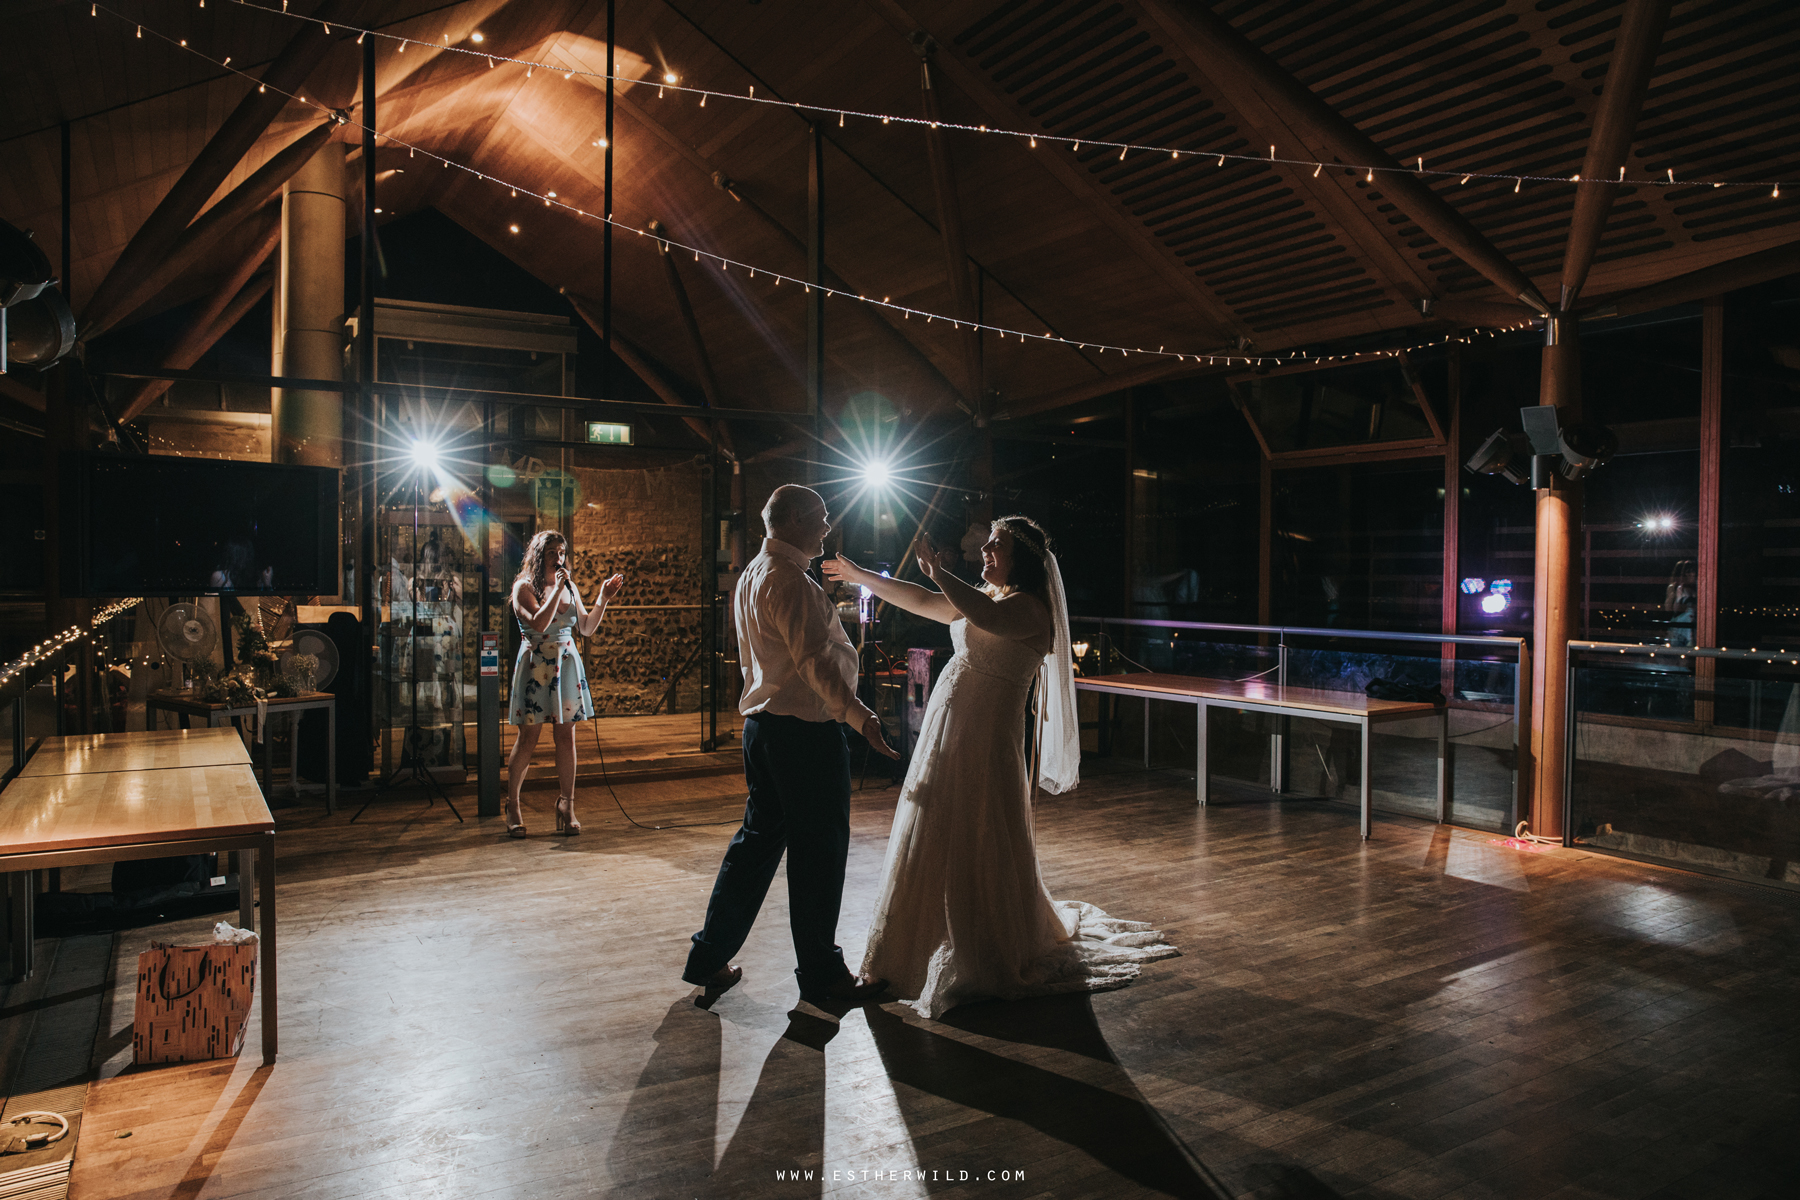 Norwich_Castle_Arcade_Grosvenor_Chip_Birdcage_Cathedral_Cloisters_Refectory_Wedding_Photography_Esther_Wild_Photographer_Norfolk_Kings_Lynn_3R8A3277.jpg